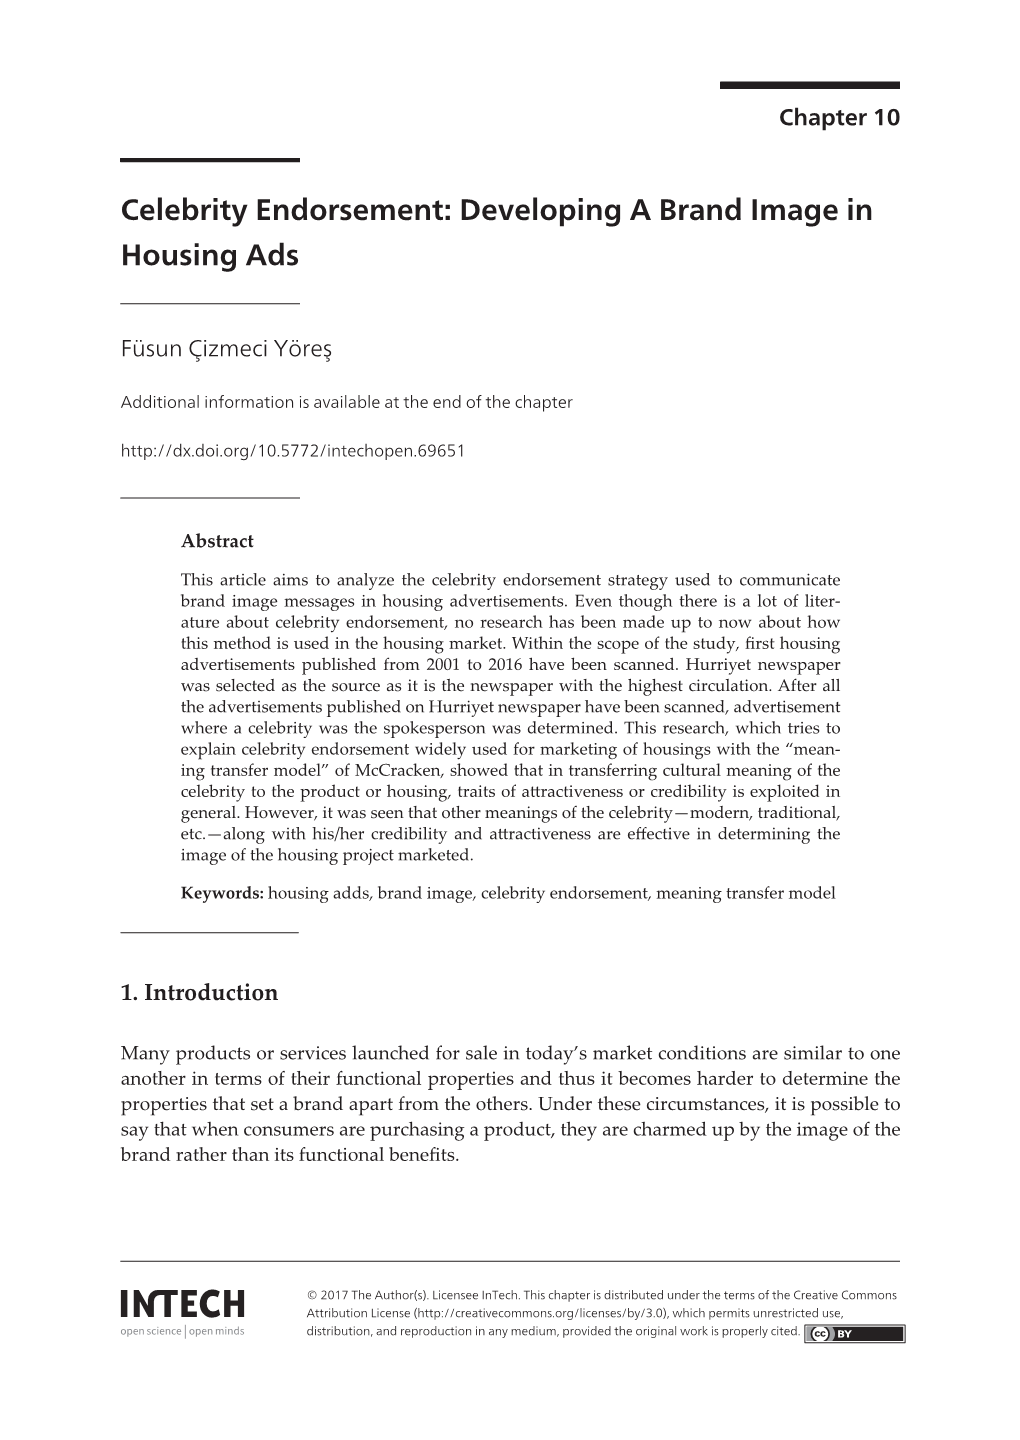 Celebrity Endorsement: Developing a Brand Image in Celebrityhousing Ads Endorsement: Developing a Brand Image in Housing Ads